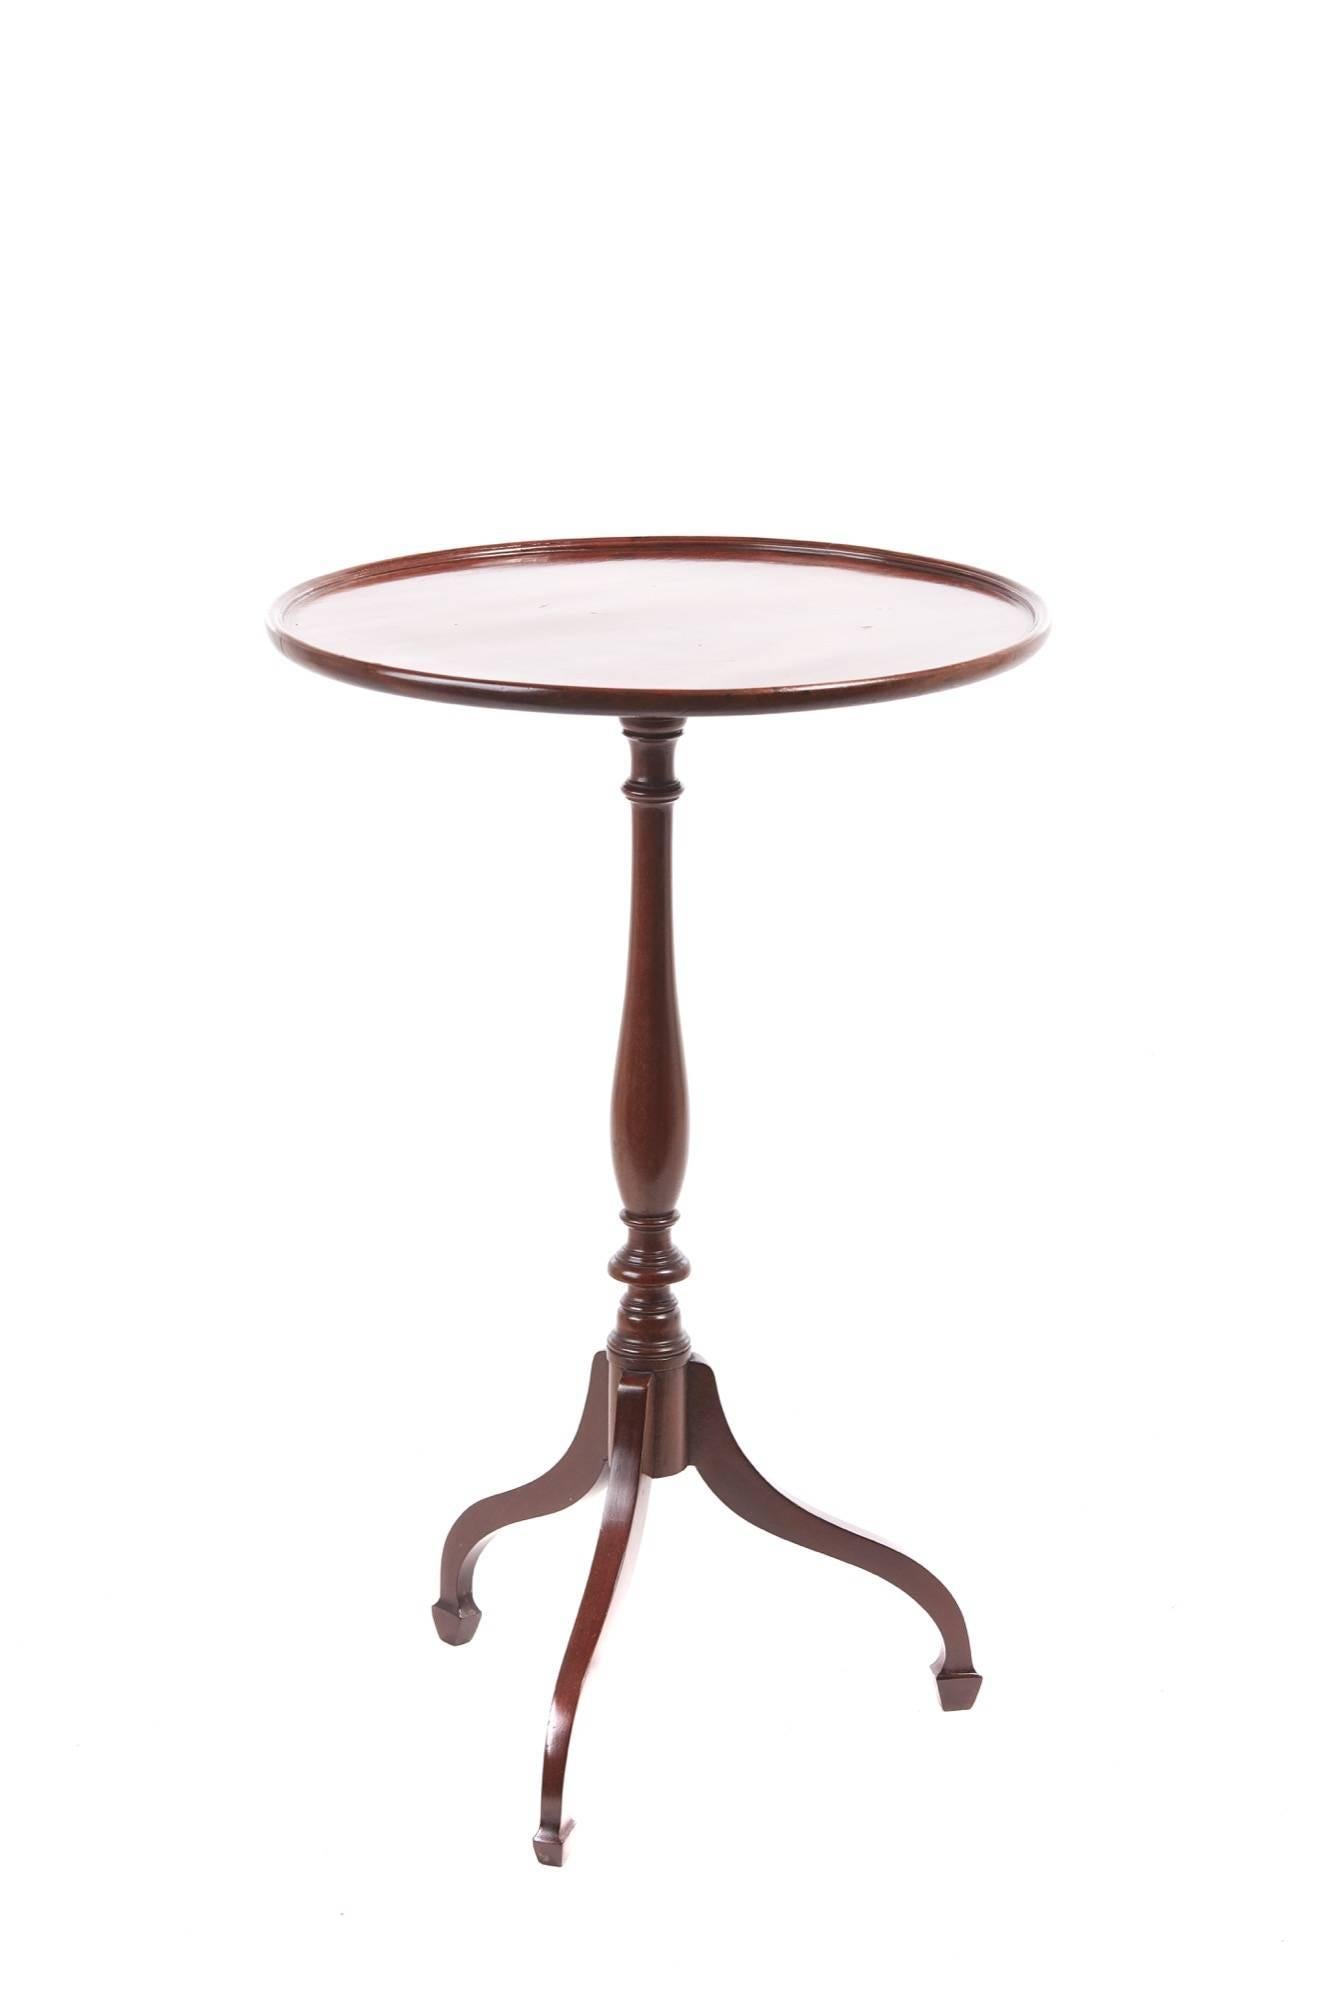 Fine George III mahogany circular dish top tripod wine/lamp table, lovely mahogany dish tilt top table supported on turned boulbous column standing on three unusual shaped legs with spade feet
Lovely color and condition
Measures: 18